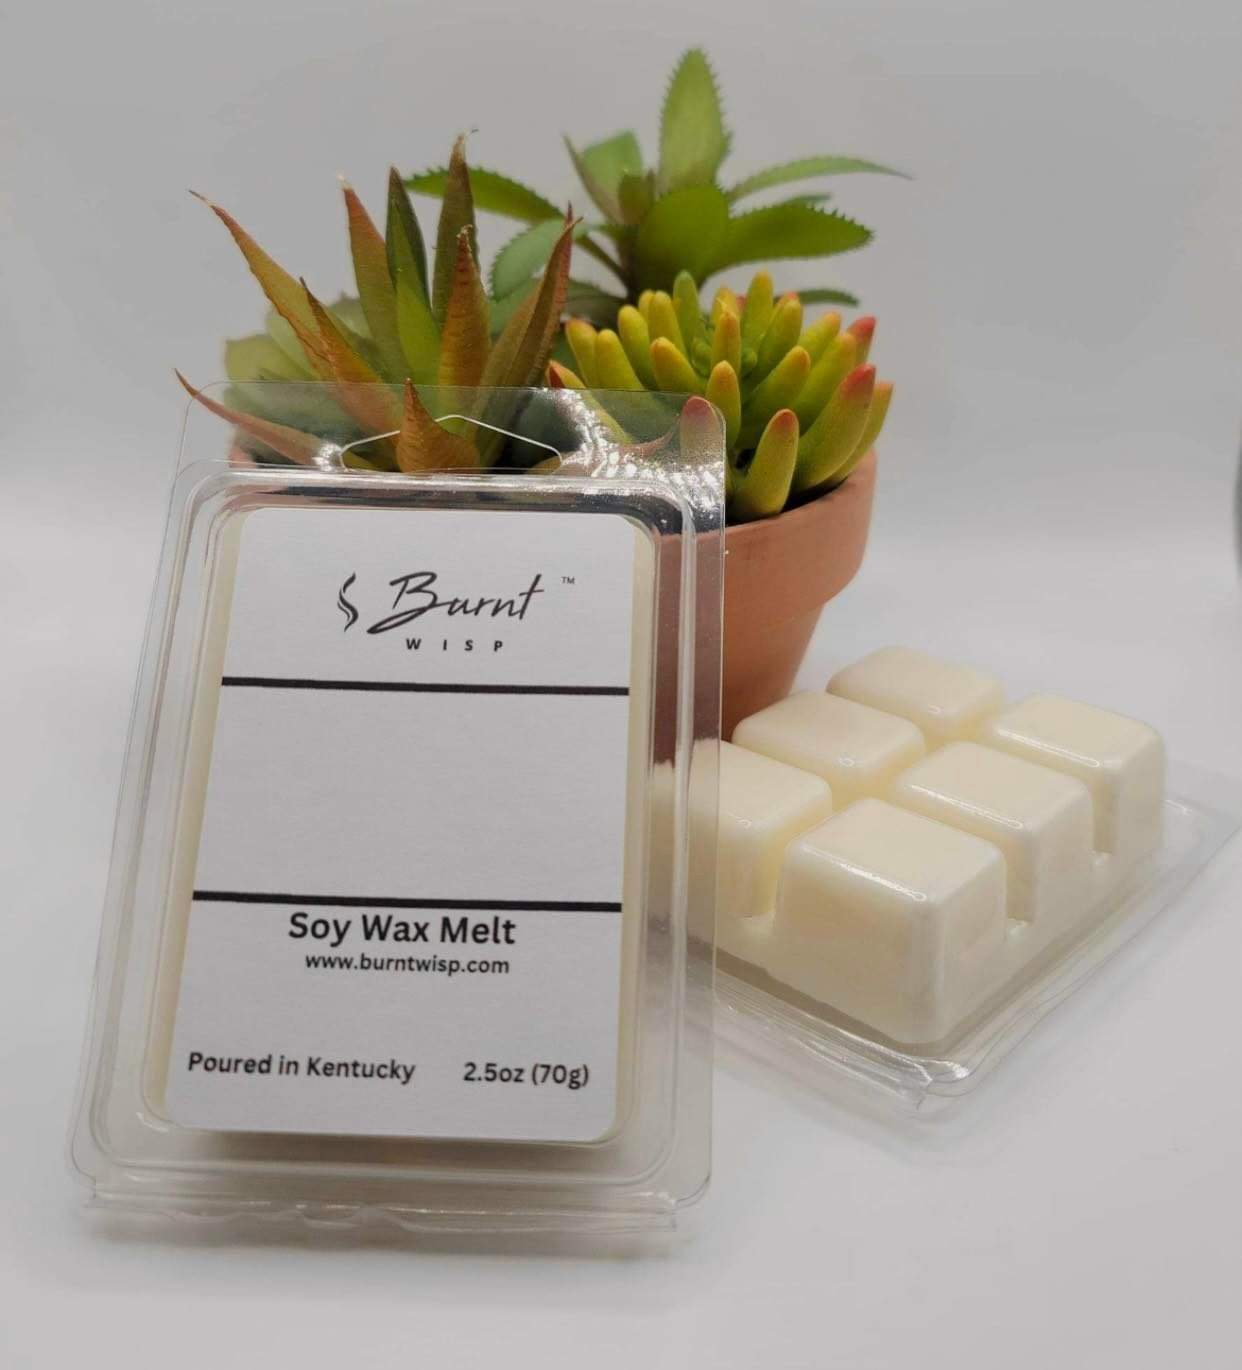 Waterlily Jasmine Wax Melts, Strong Wax Melt, 2 Oz Cup, Laundry